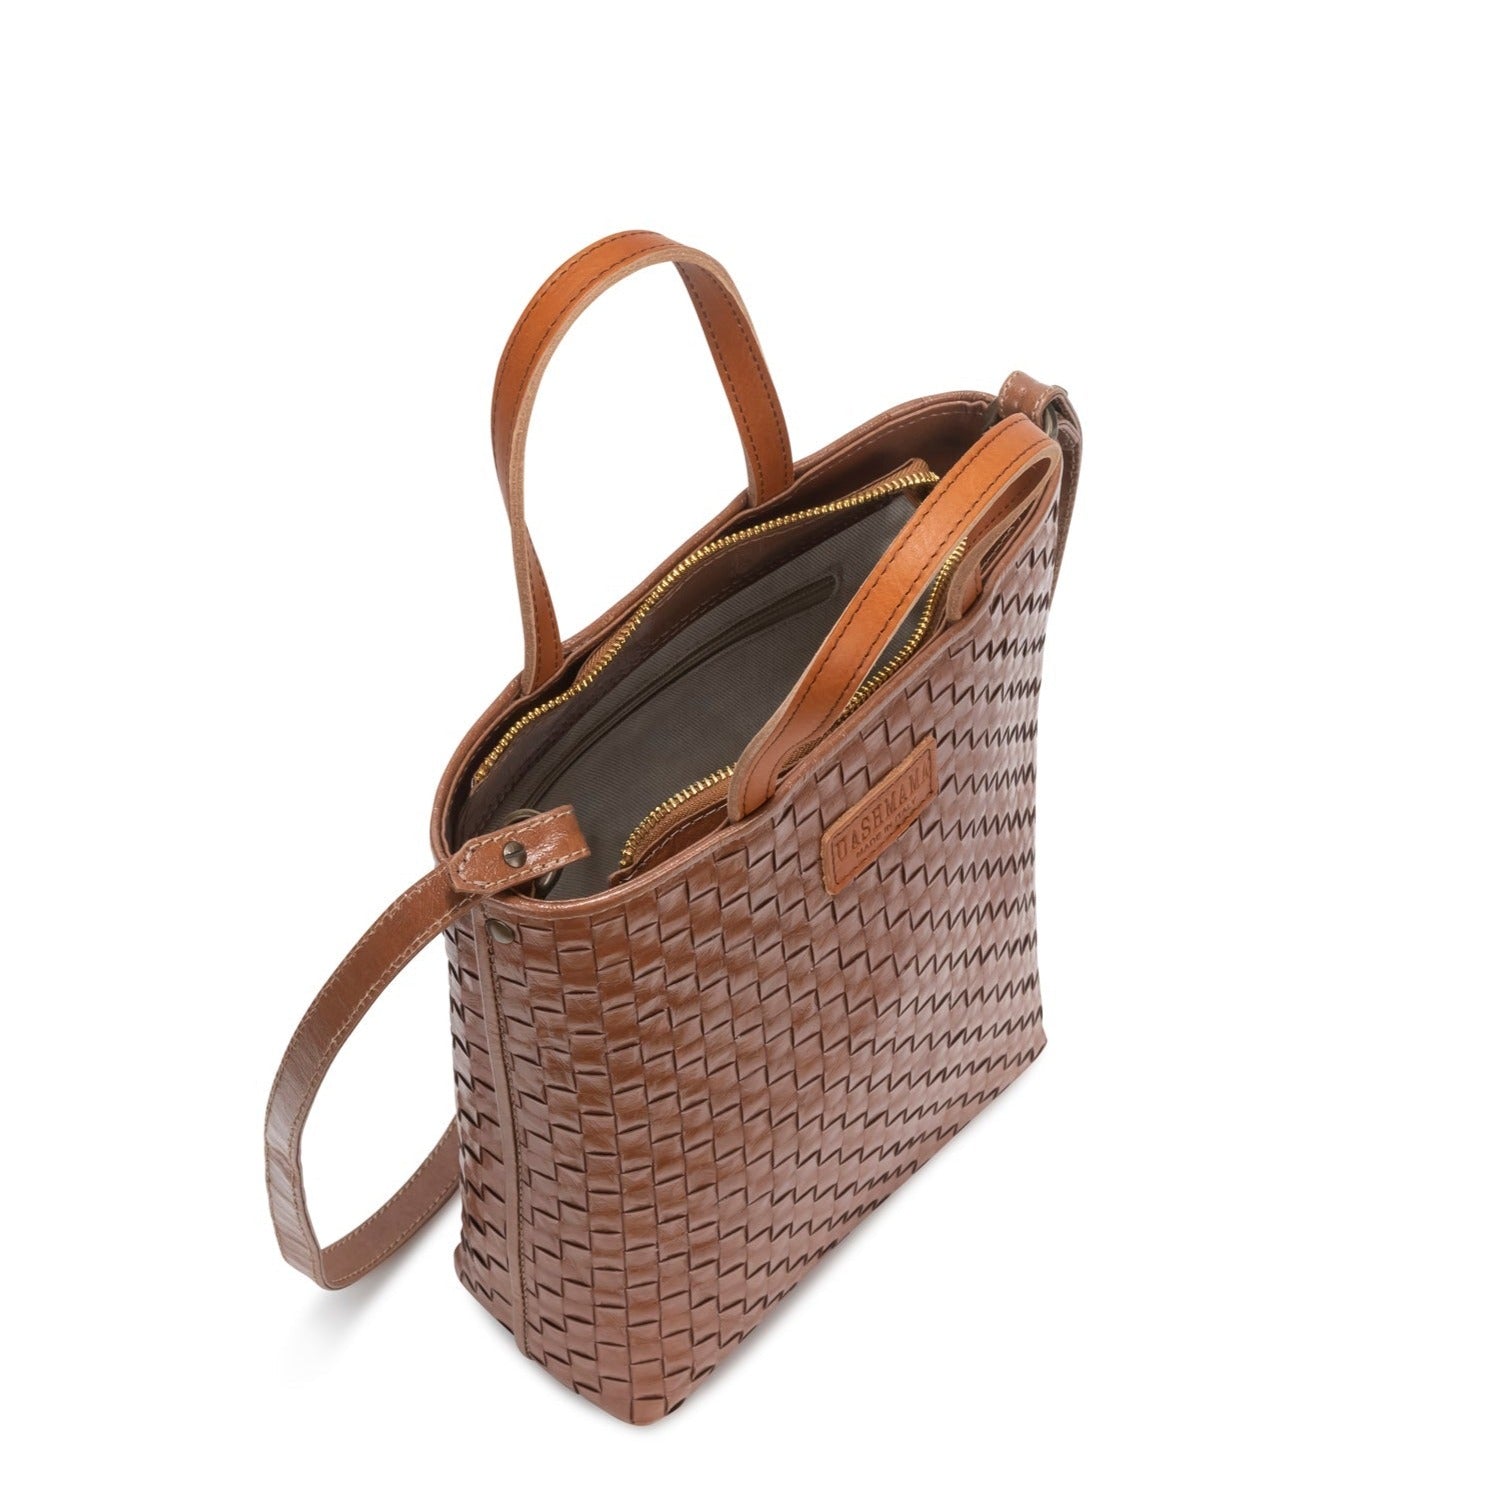 A woven washable paper tote bag is shown from a top-down angle, unzipped to reveal an inside zip pocket. It is brown in colour.